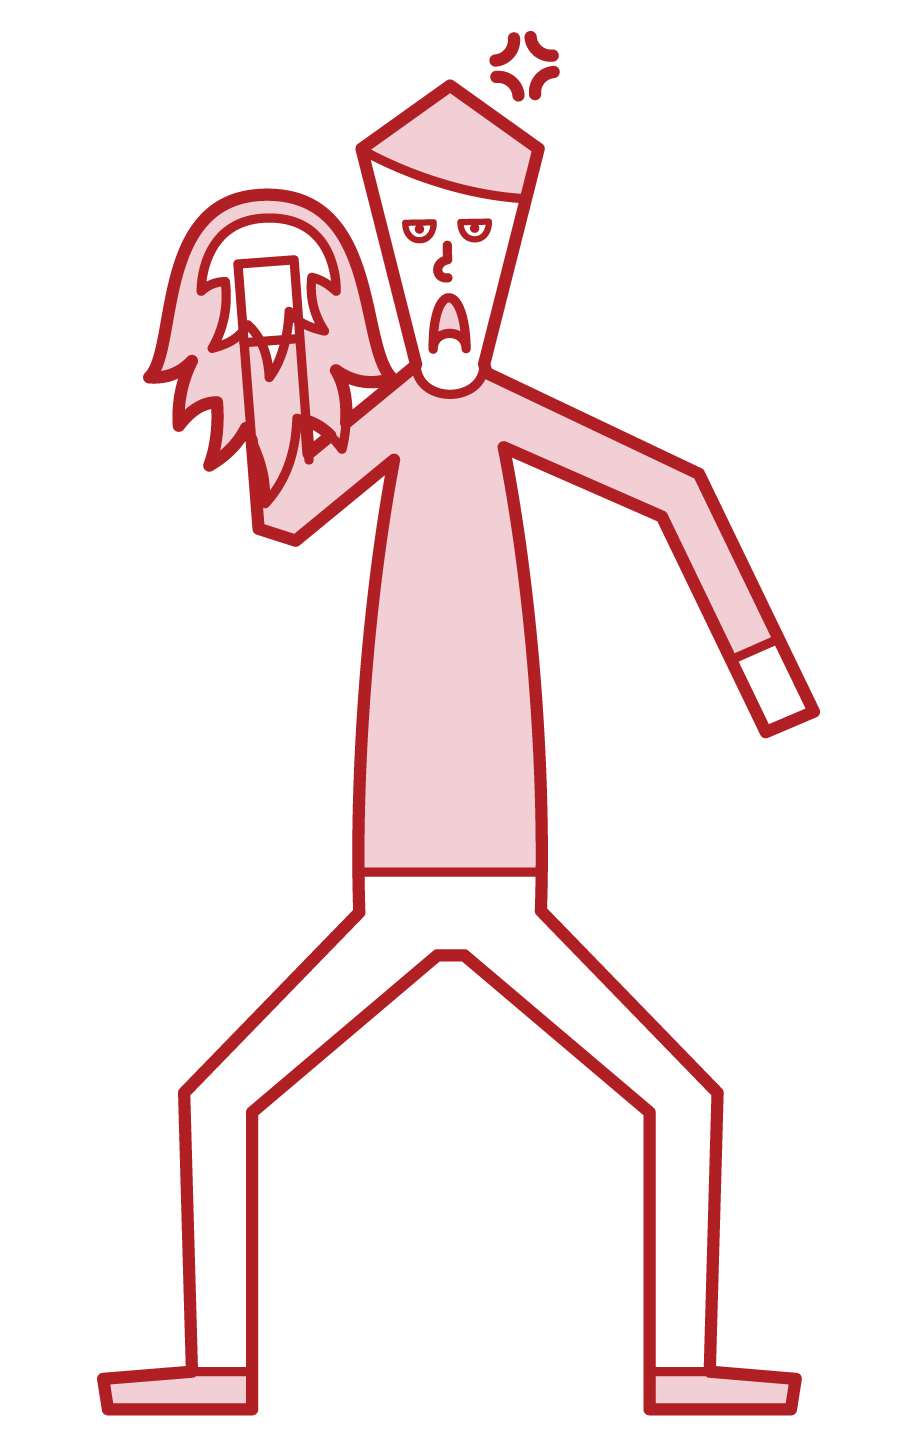 Illustration of a man who burns in anger